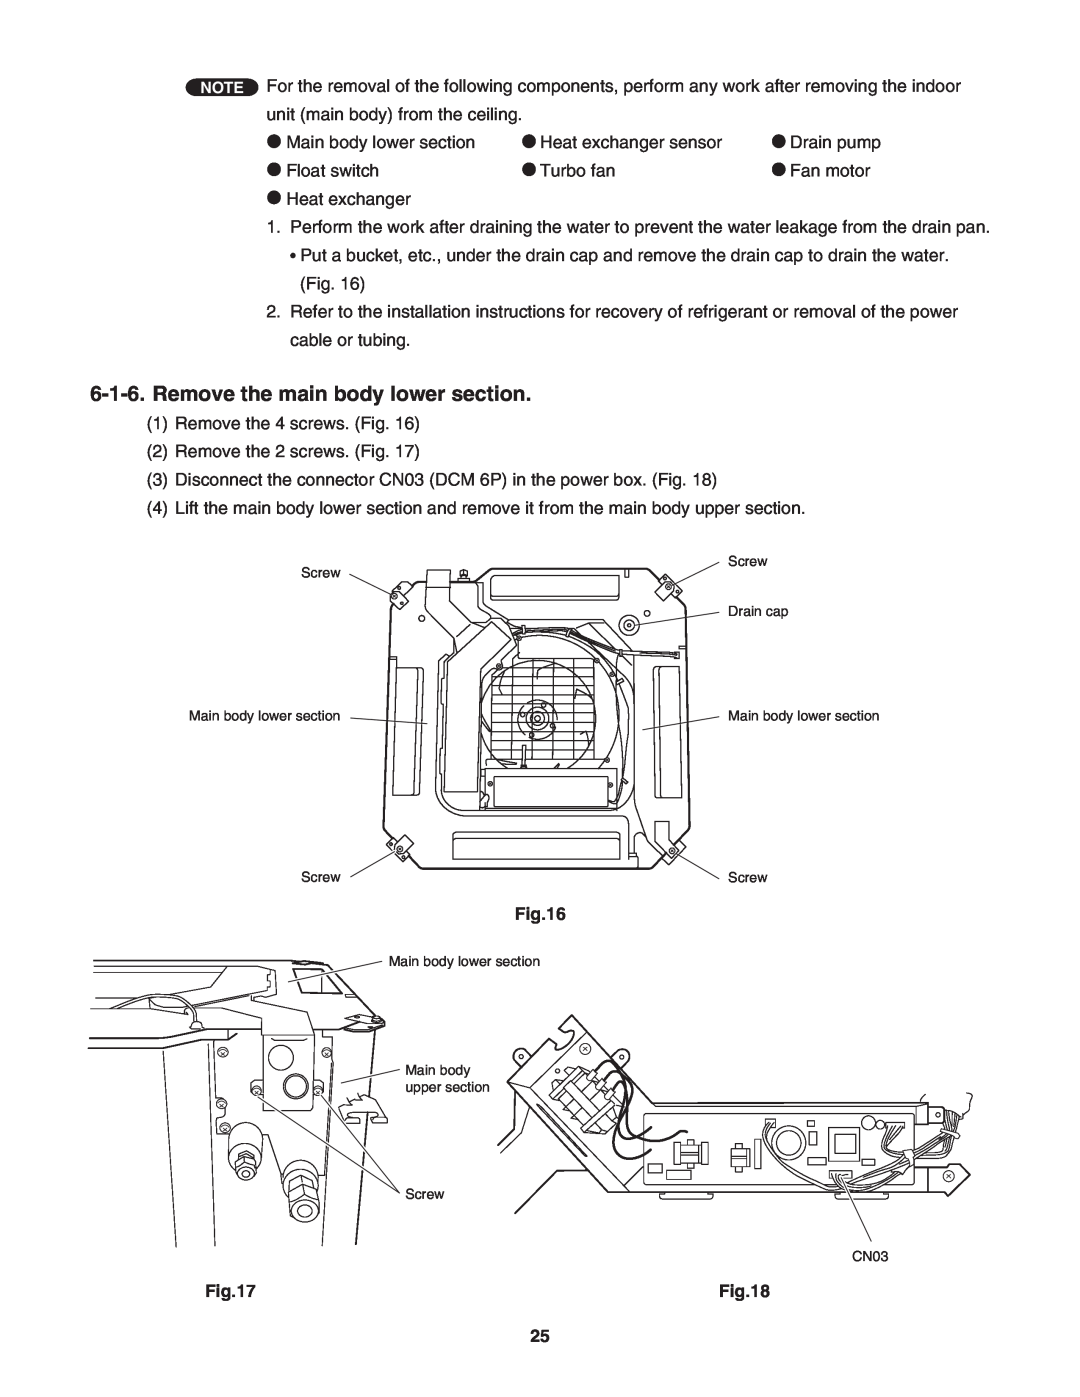 Panasonic R410A service manual Remove the main body lower section 